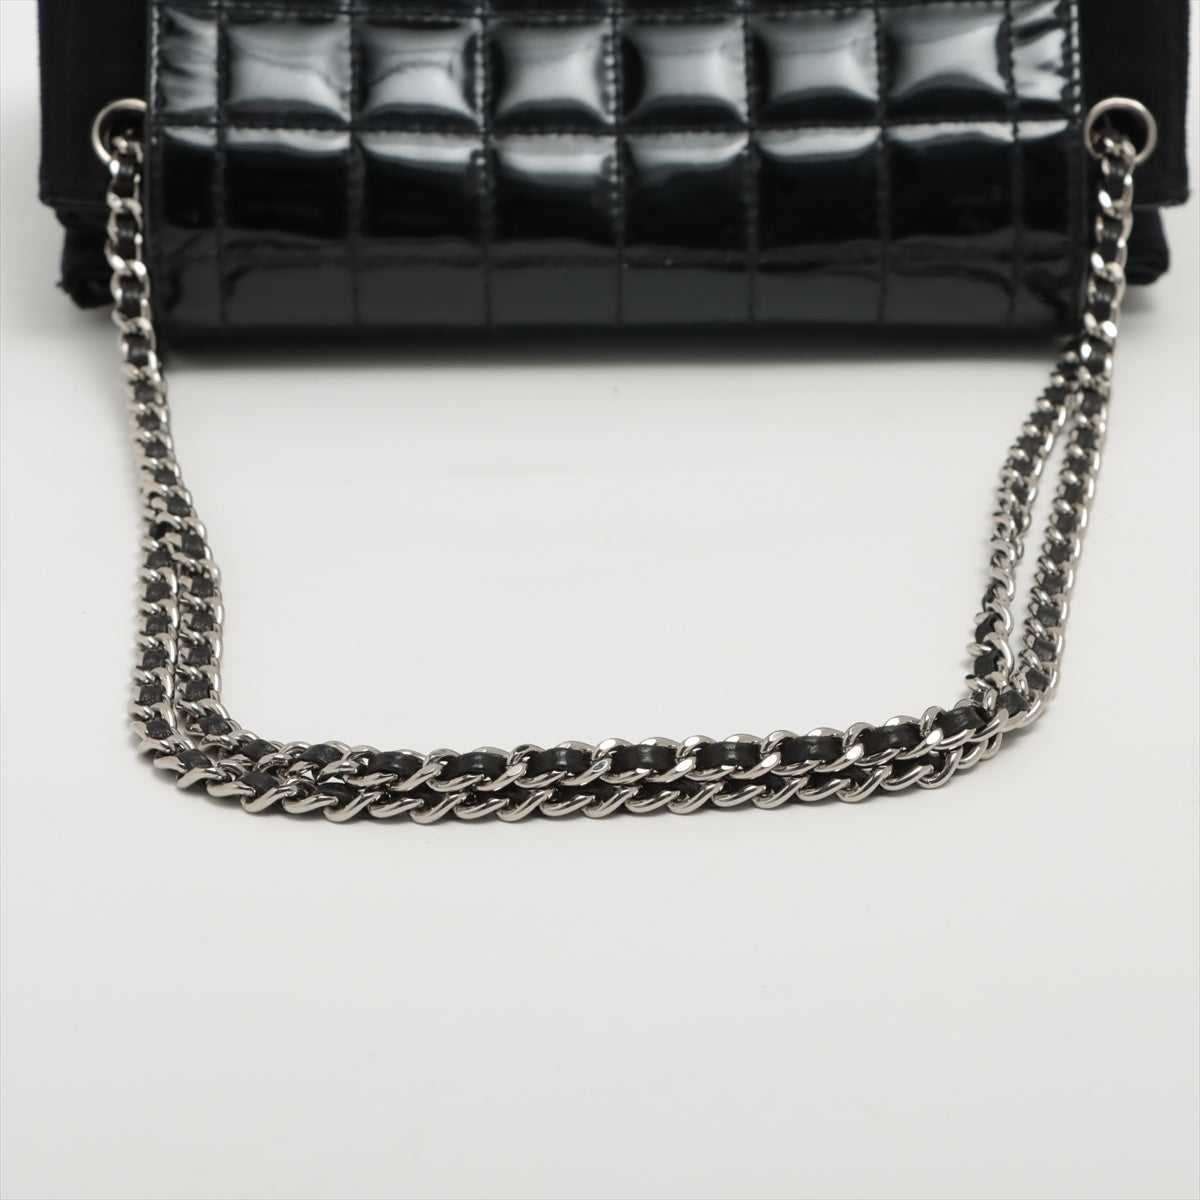 Chanel Chocolate Bar Cotton x patent leather Chain shoulder bag 2.55 Black Silver Metal fittings 6XXXXXX